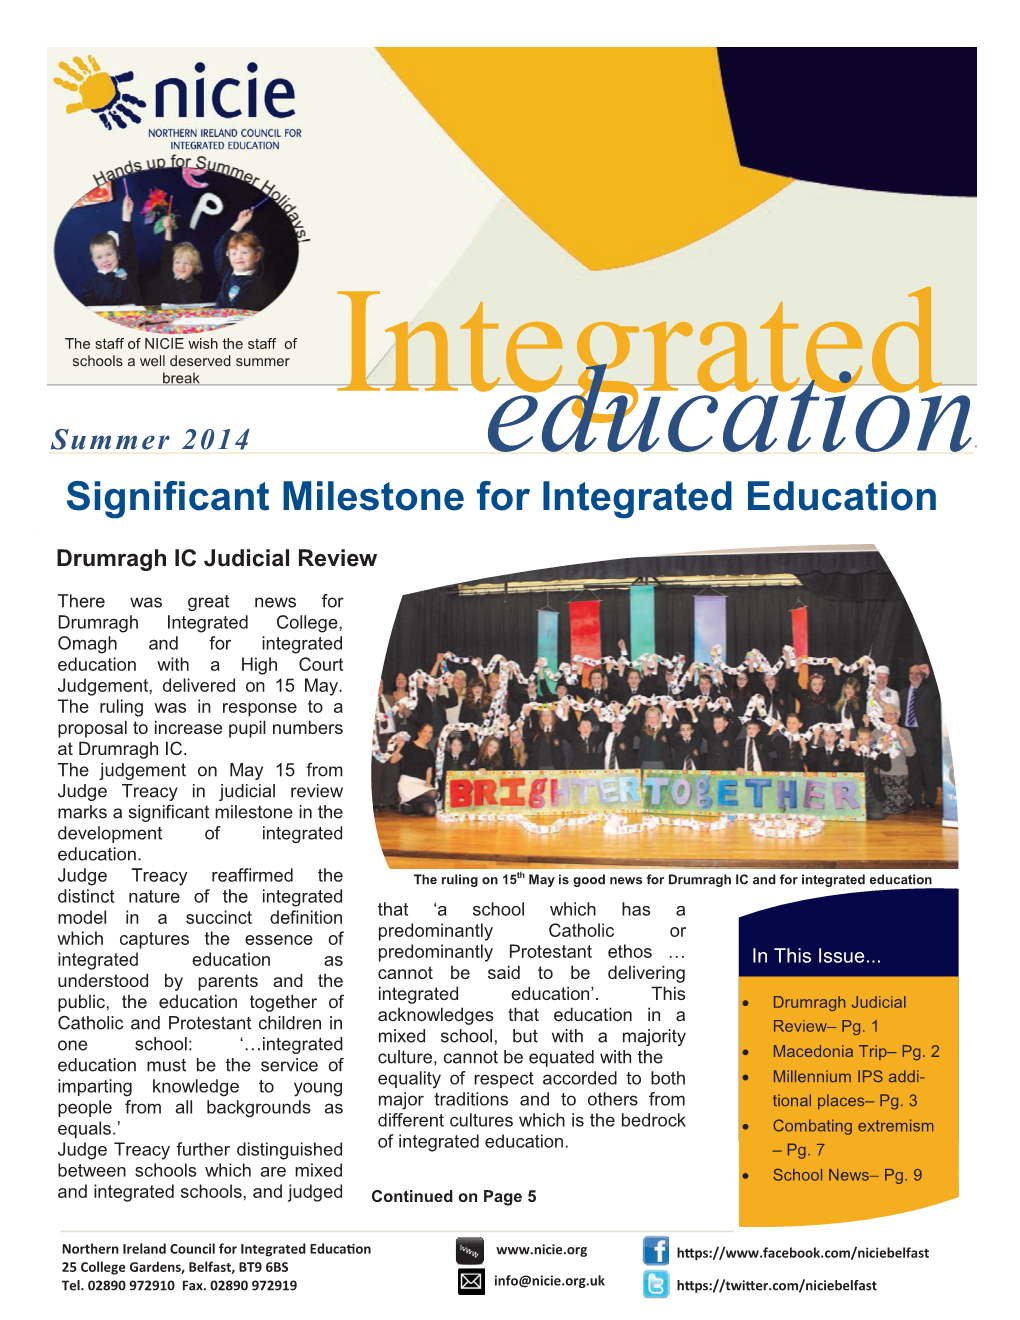 Significant Milestone for Integrated Education